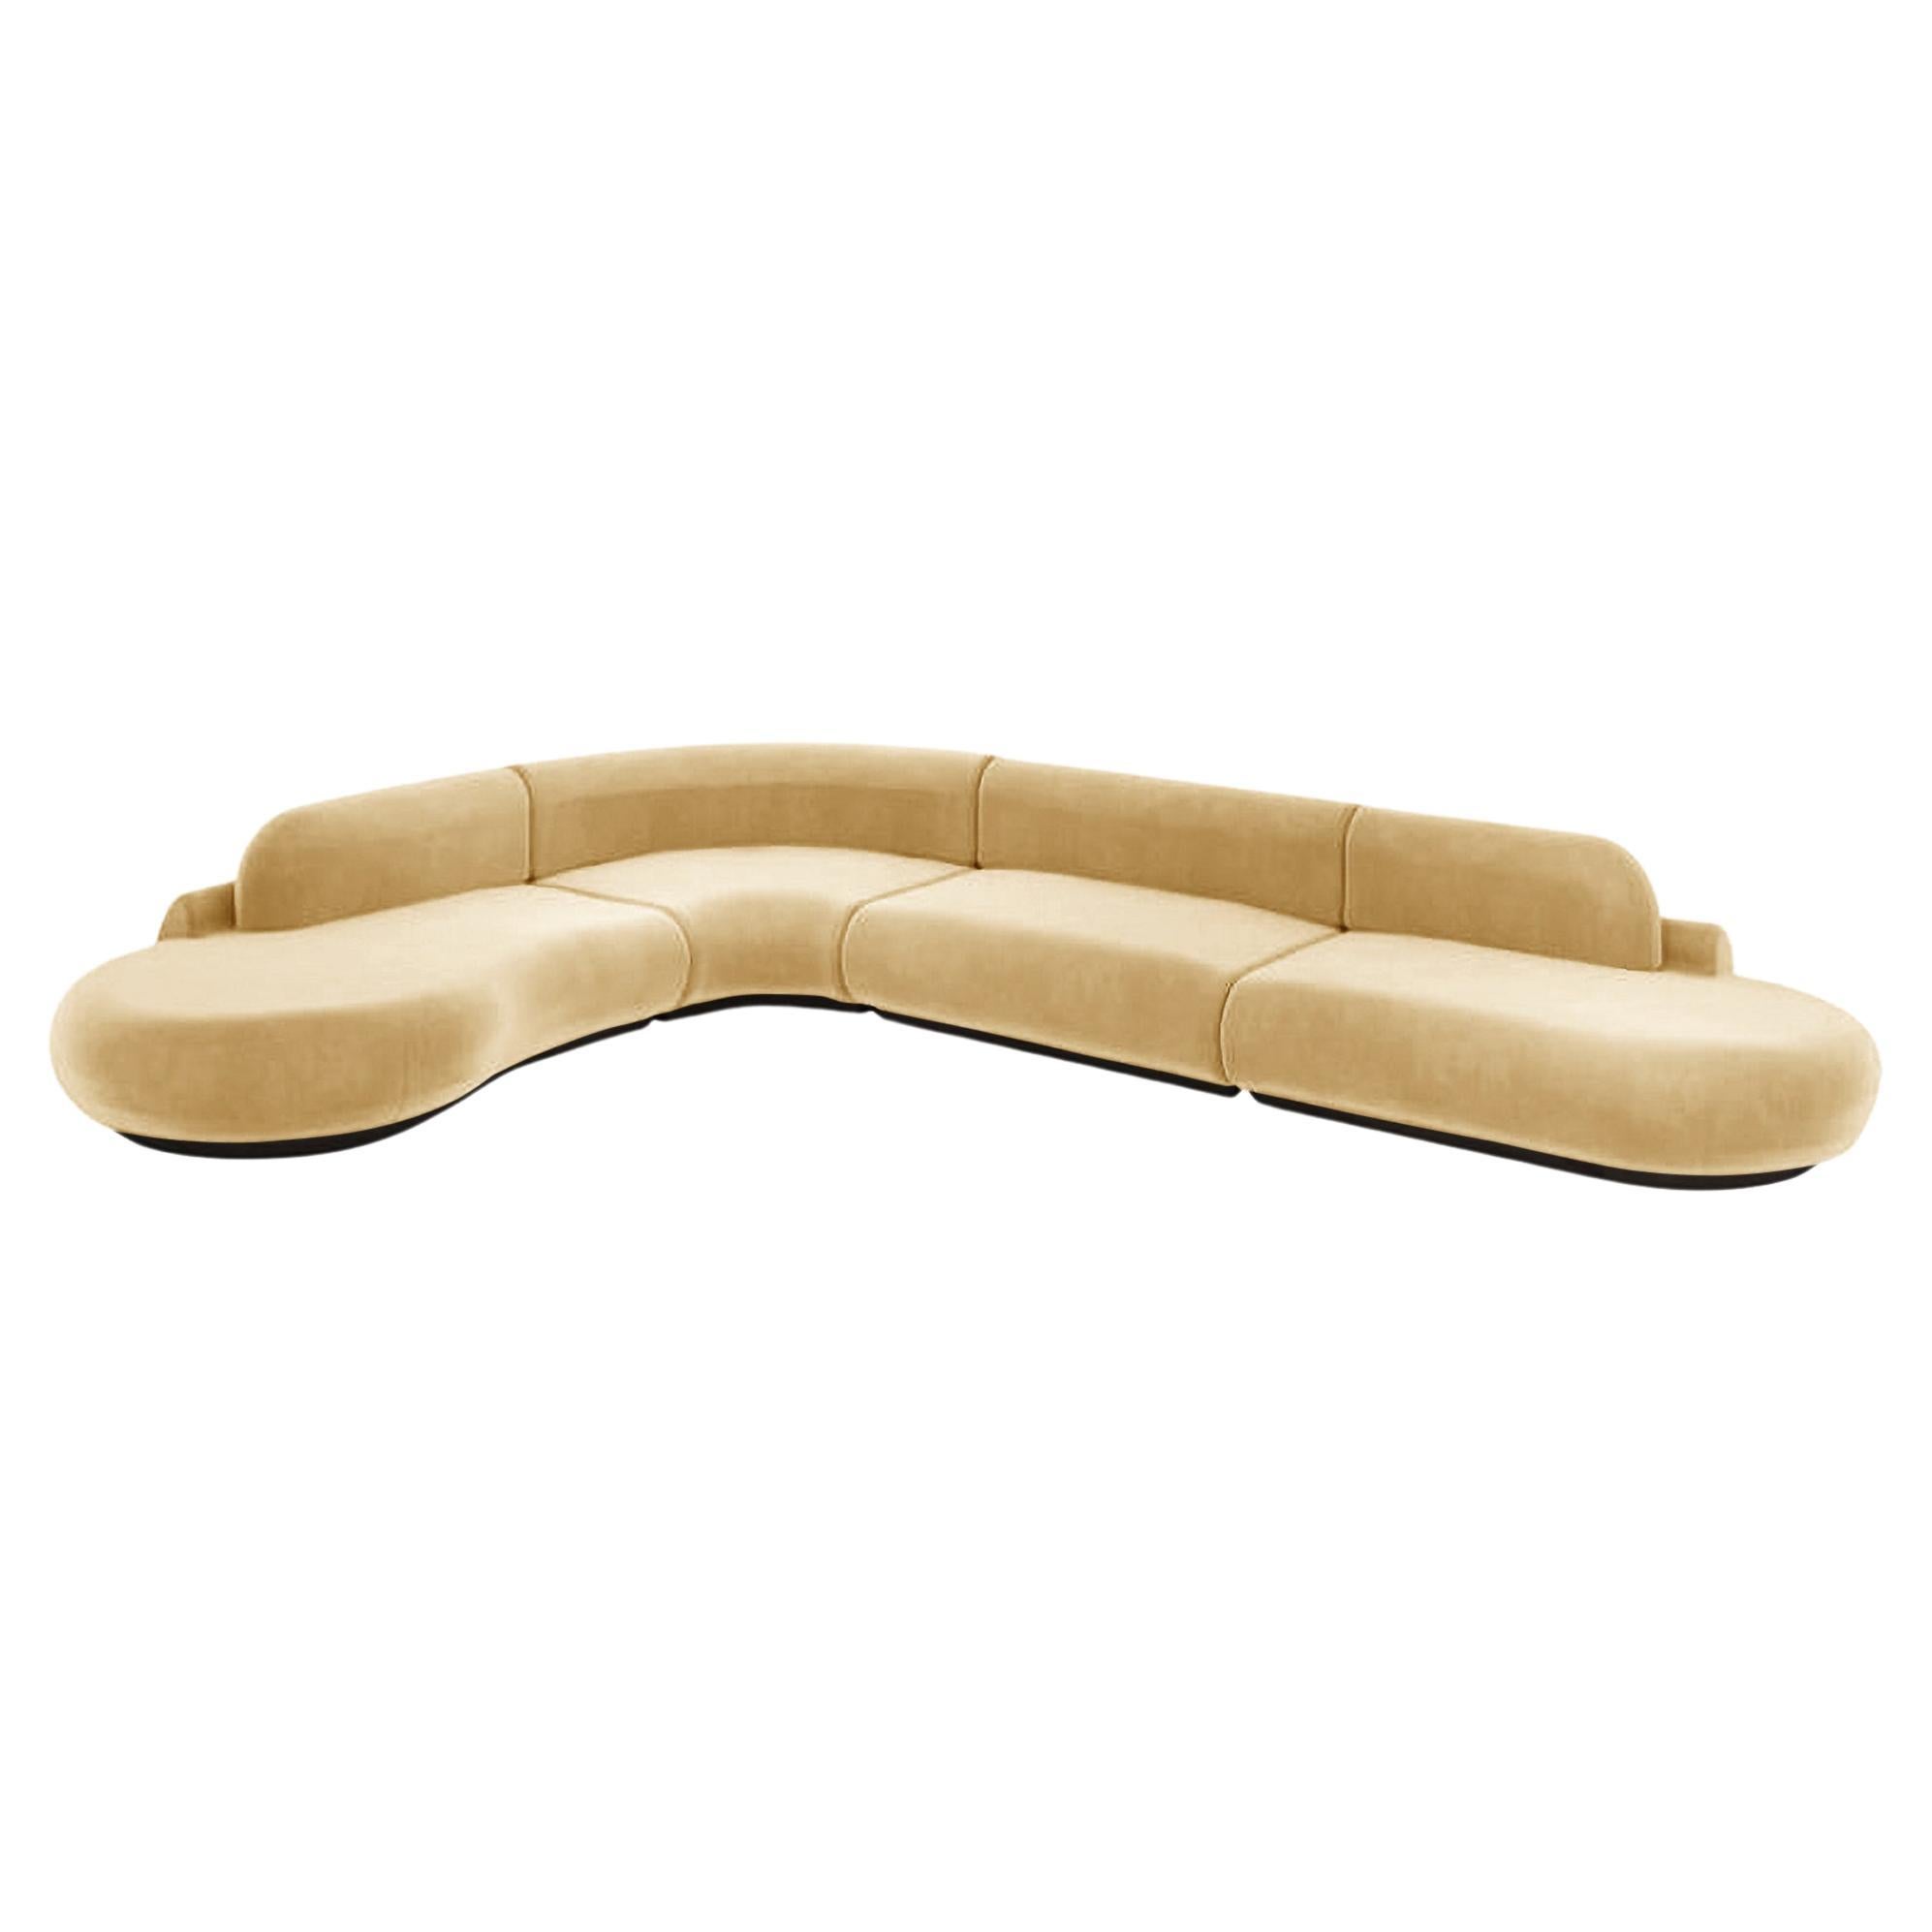 Naked Sectional Sofa, 4 Piece with Beech Ash-056-5 and Vigo Plantain For Sale